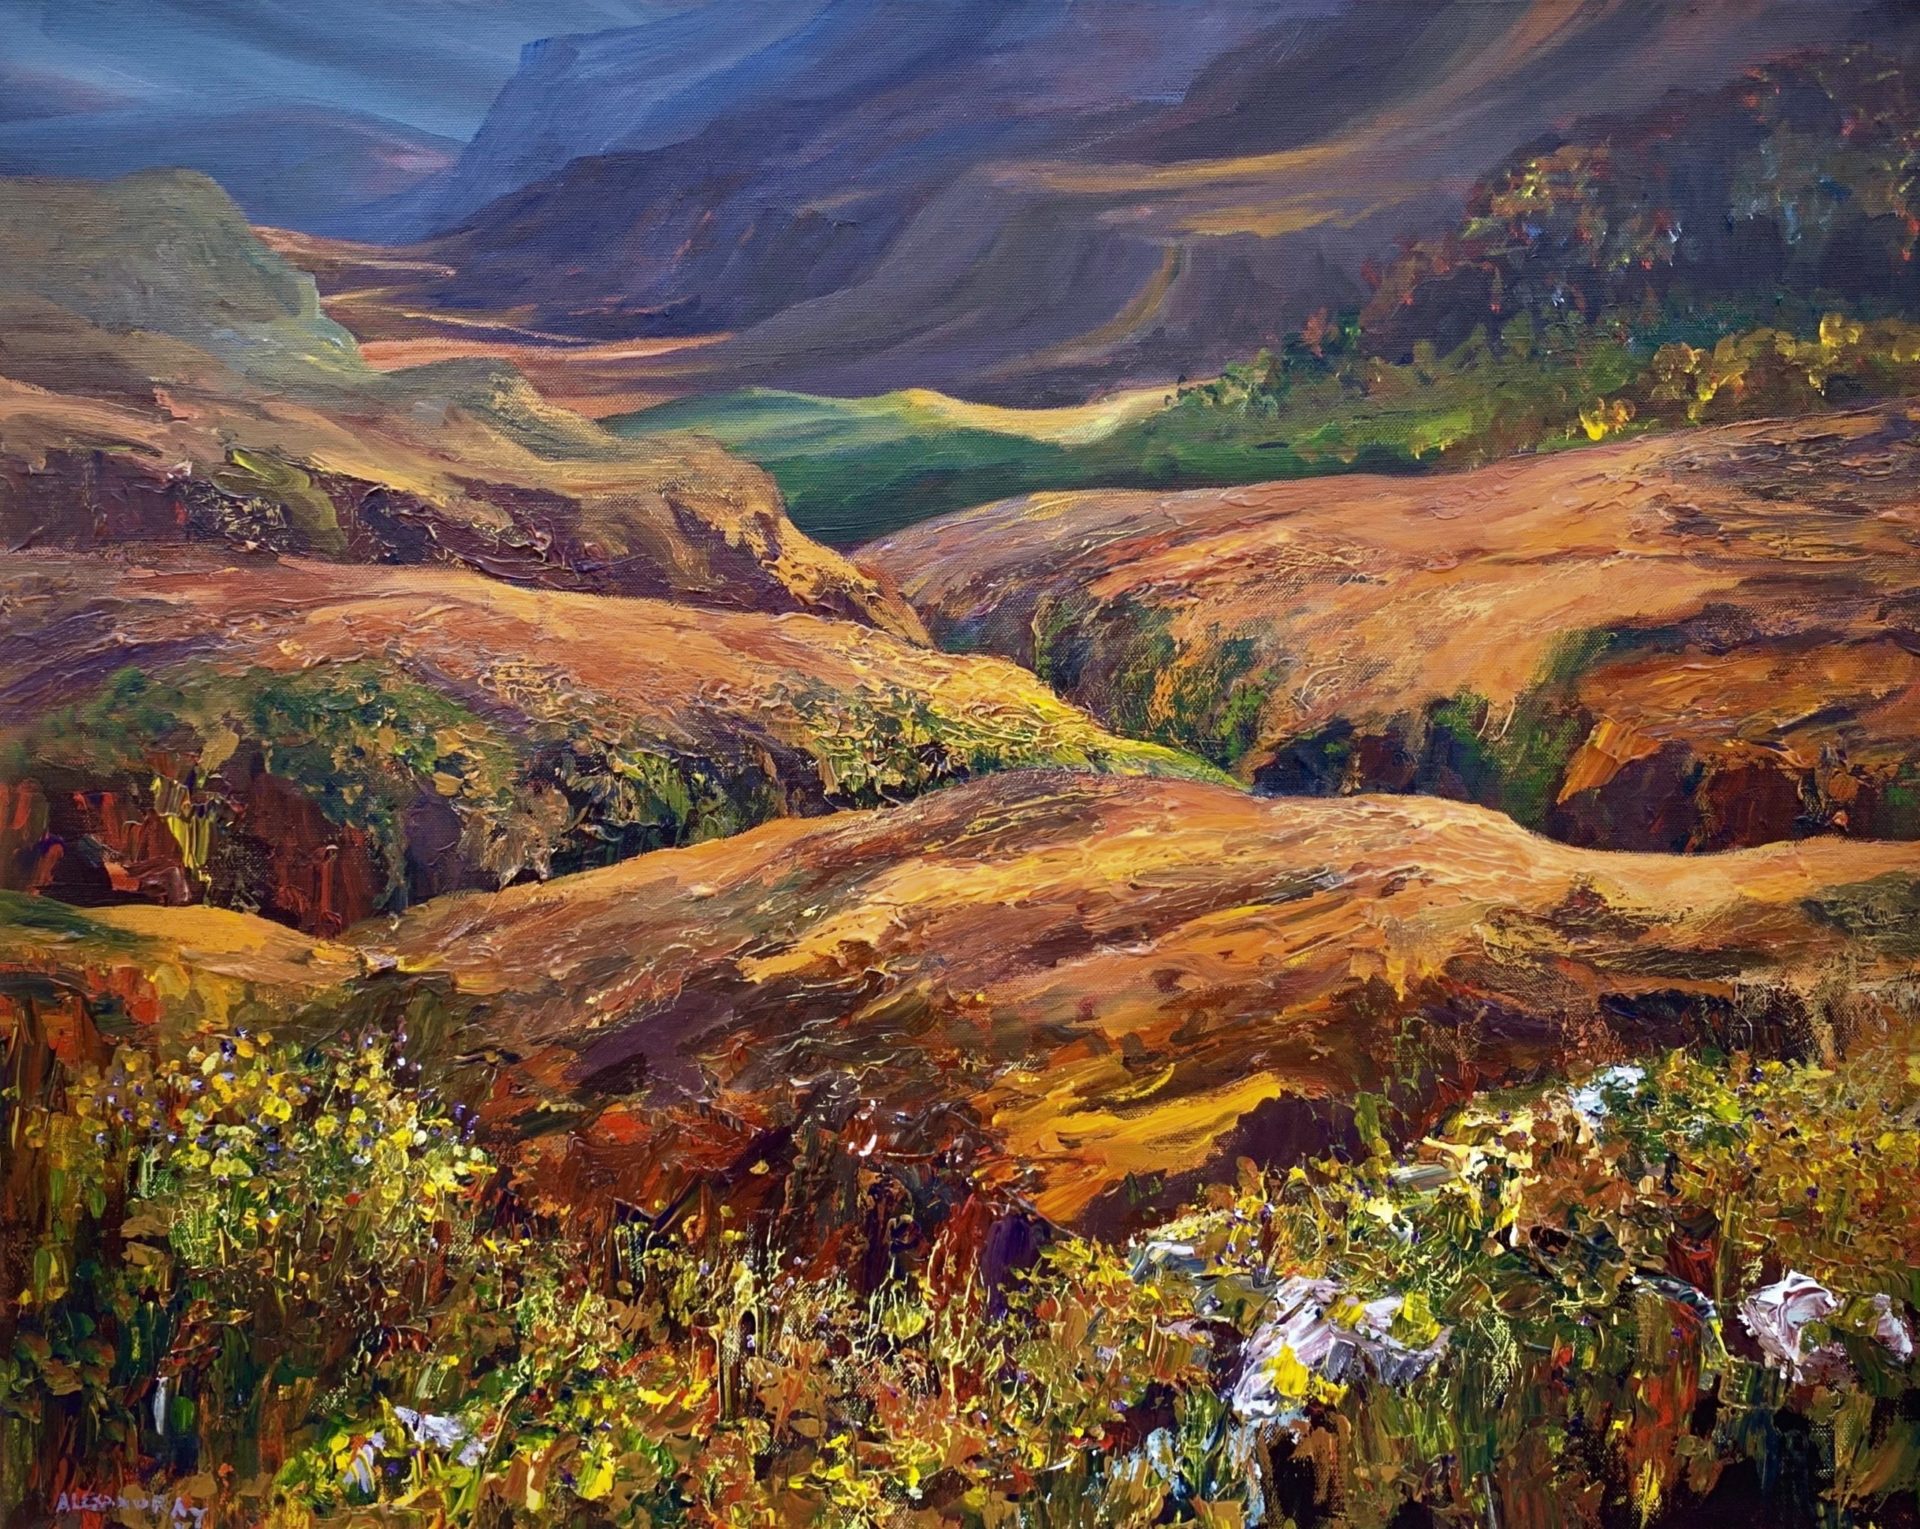 Moonlight in the Valley | Alexandra Van Tuyll – The Whitethorn Gallery